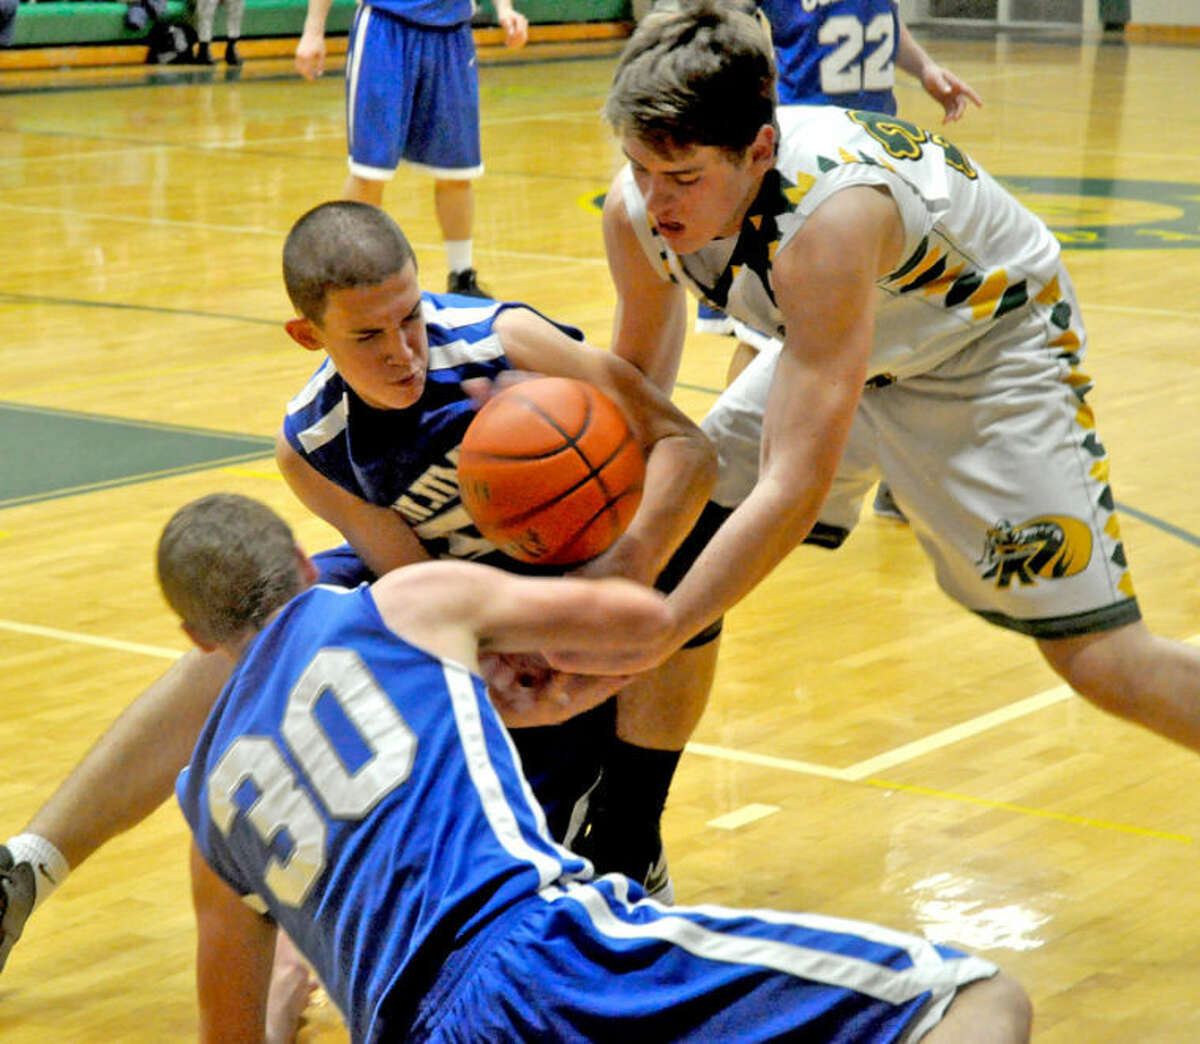 Metro-East Lutheran's Jason Johnson fights with two Columbia players for the ball.